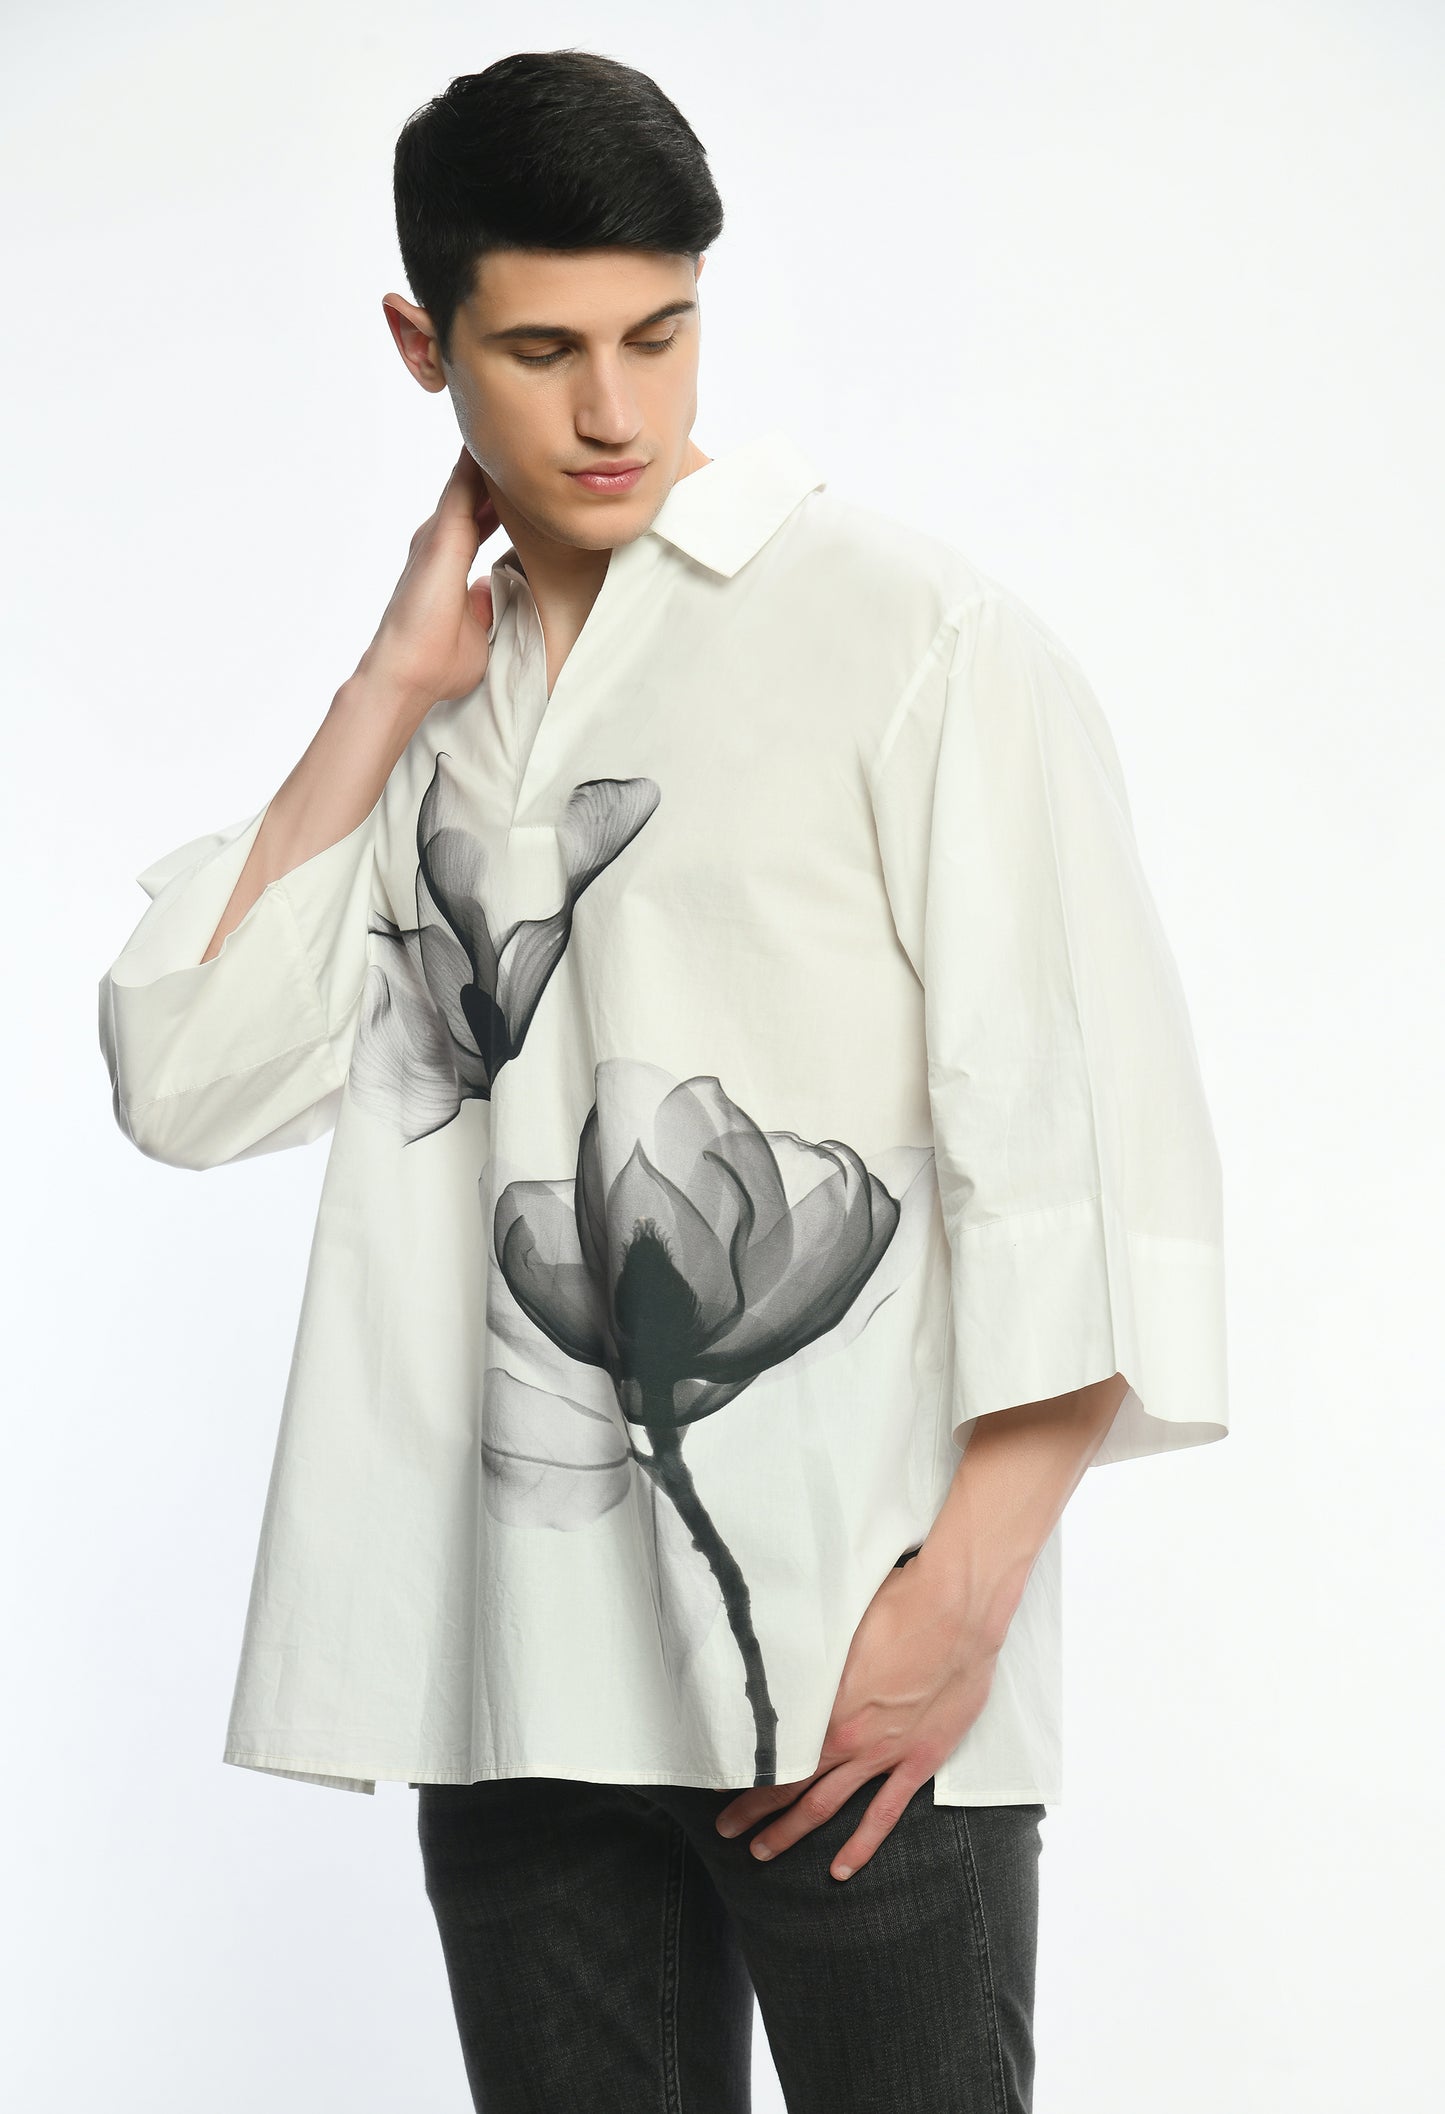 White, stylish, lose-fit, cotton shirt with digital print on it.